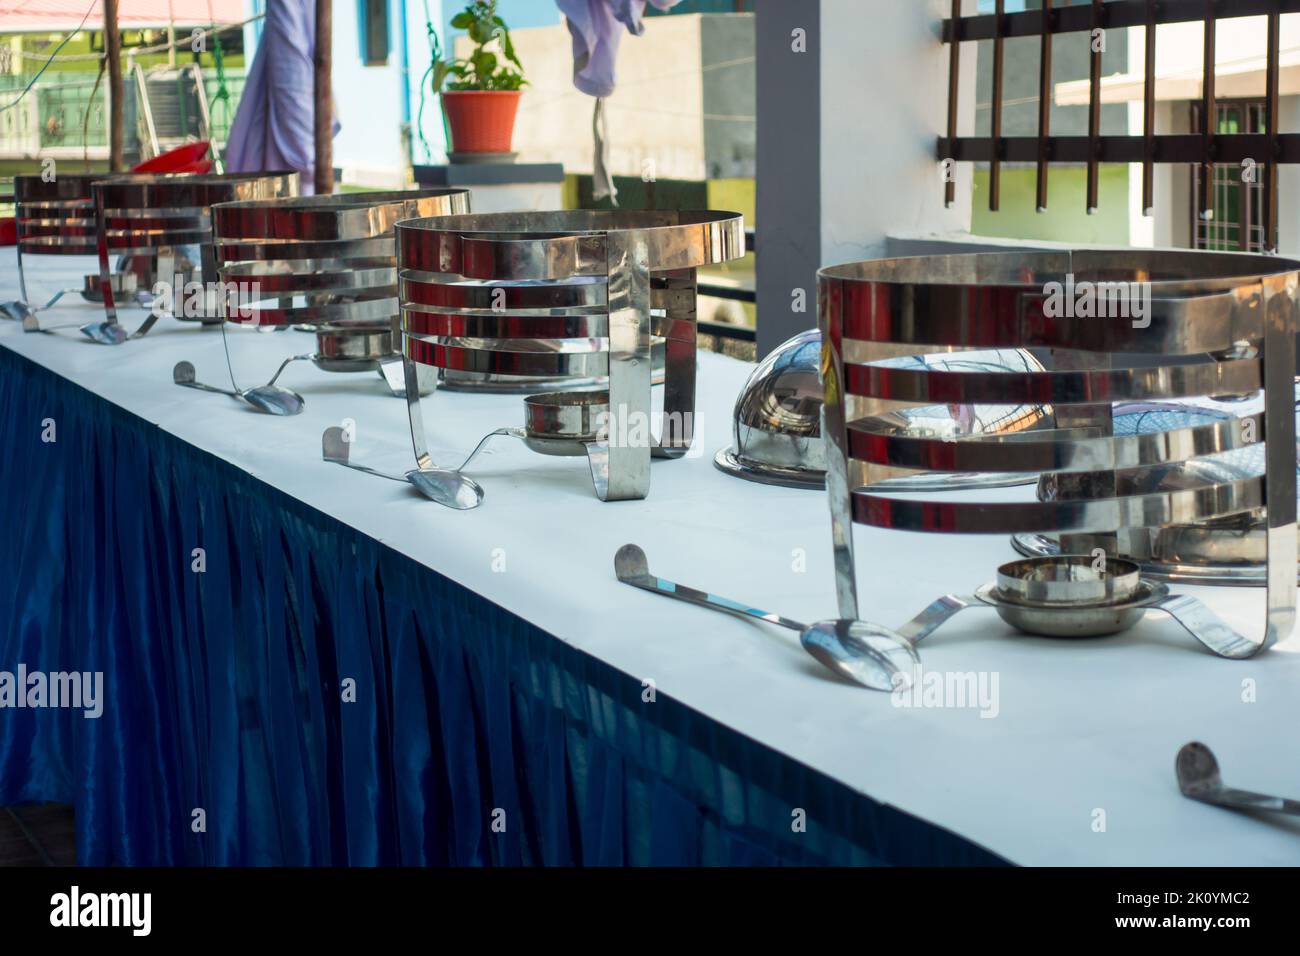 April 13th 2022, Dehradun City Uttarakhand India. Preparation of Buffet with large, stainless steel containers with a sterno fuel source before meals. Stock Photo